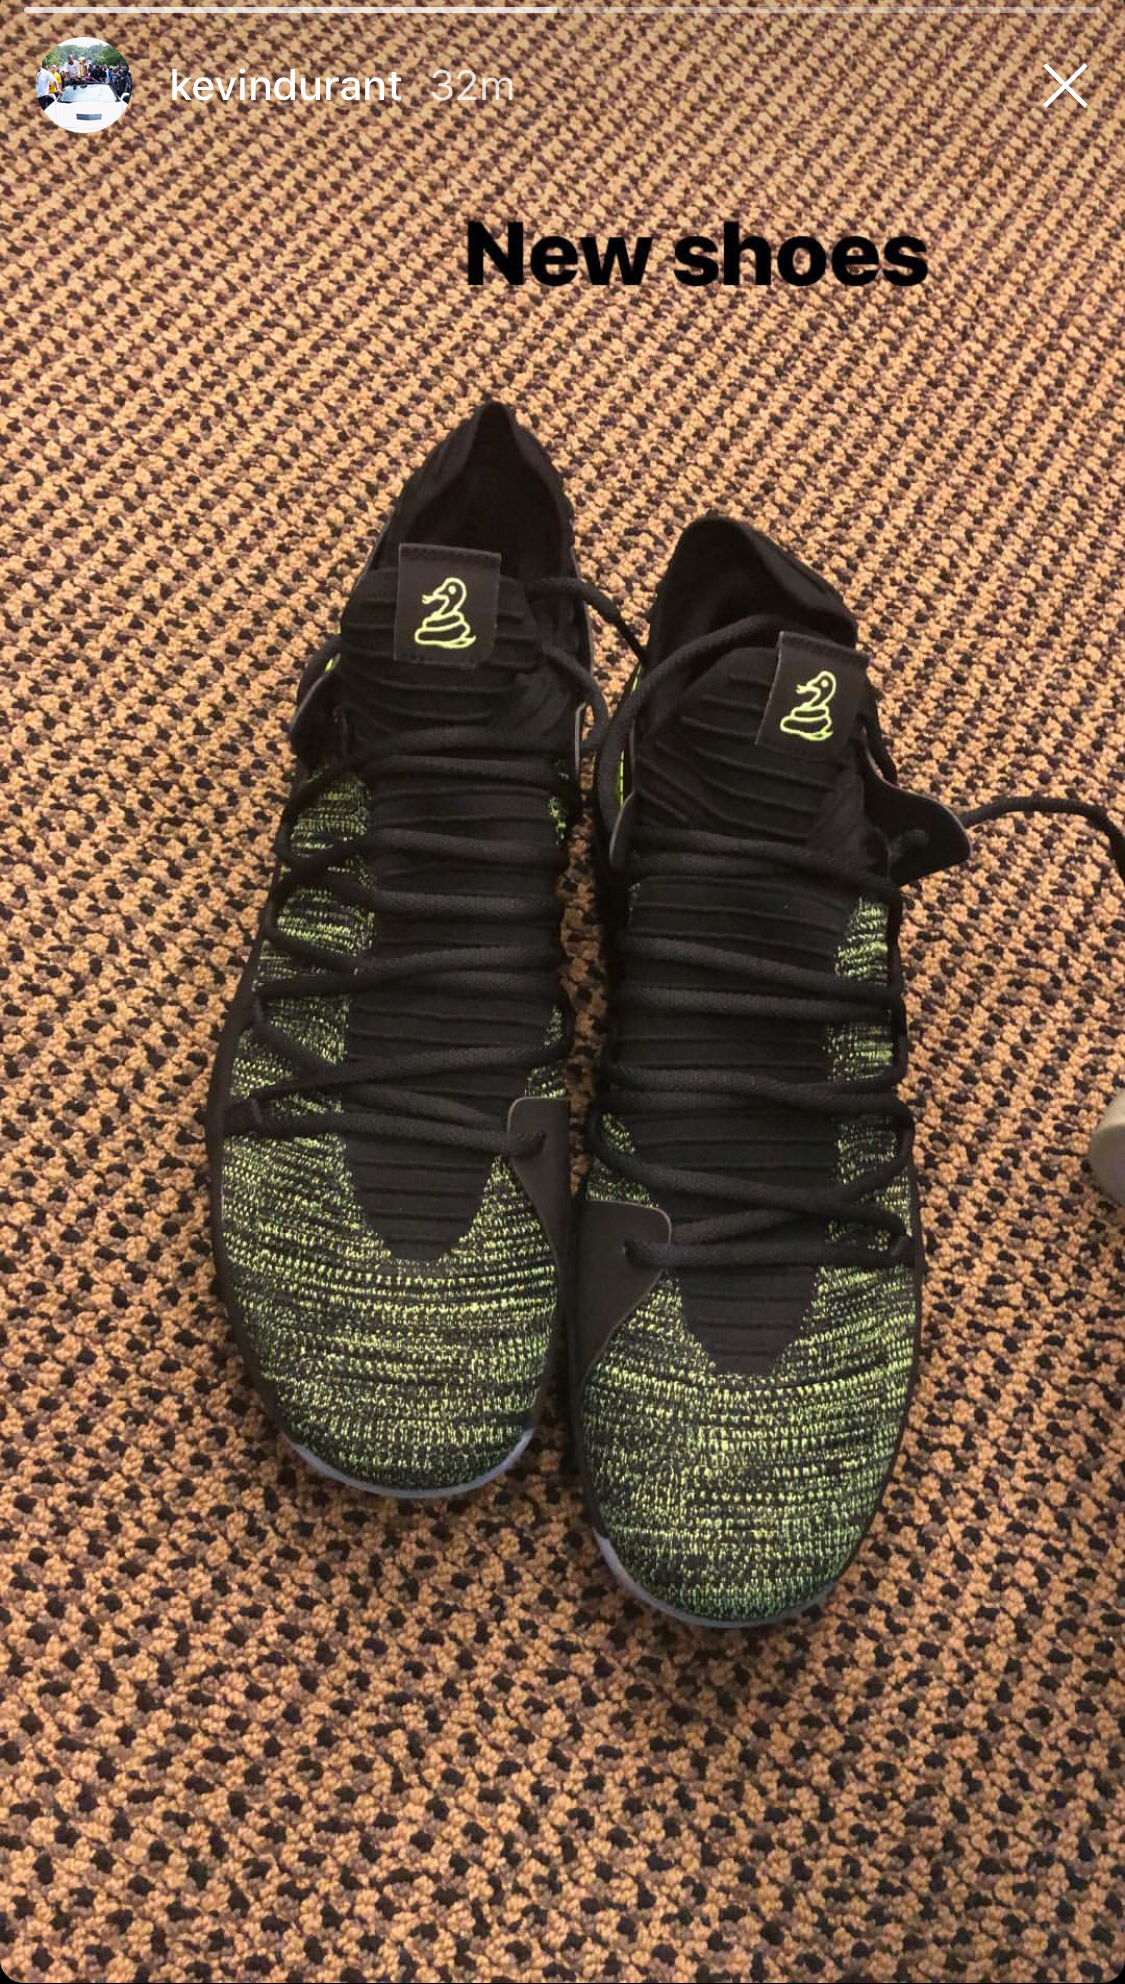 kevin durant sock shoes